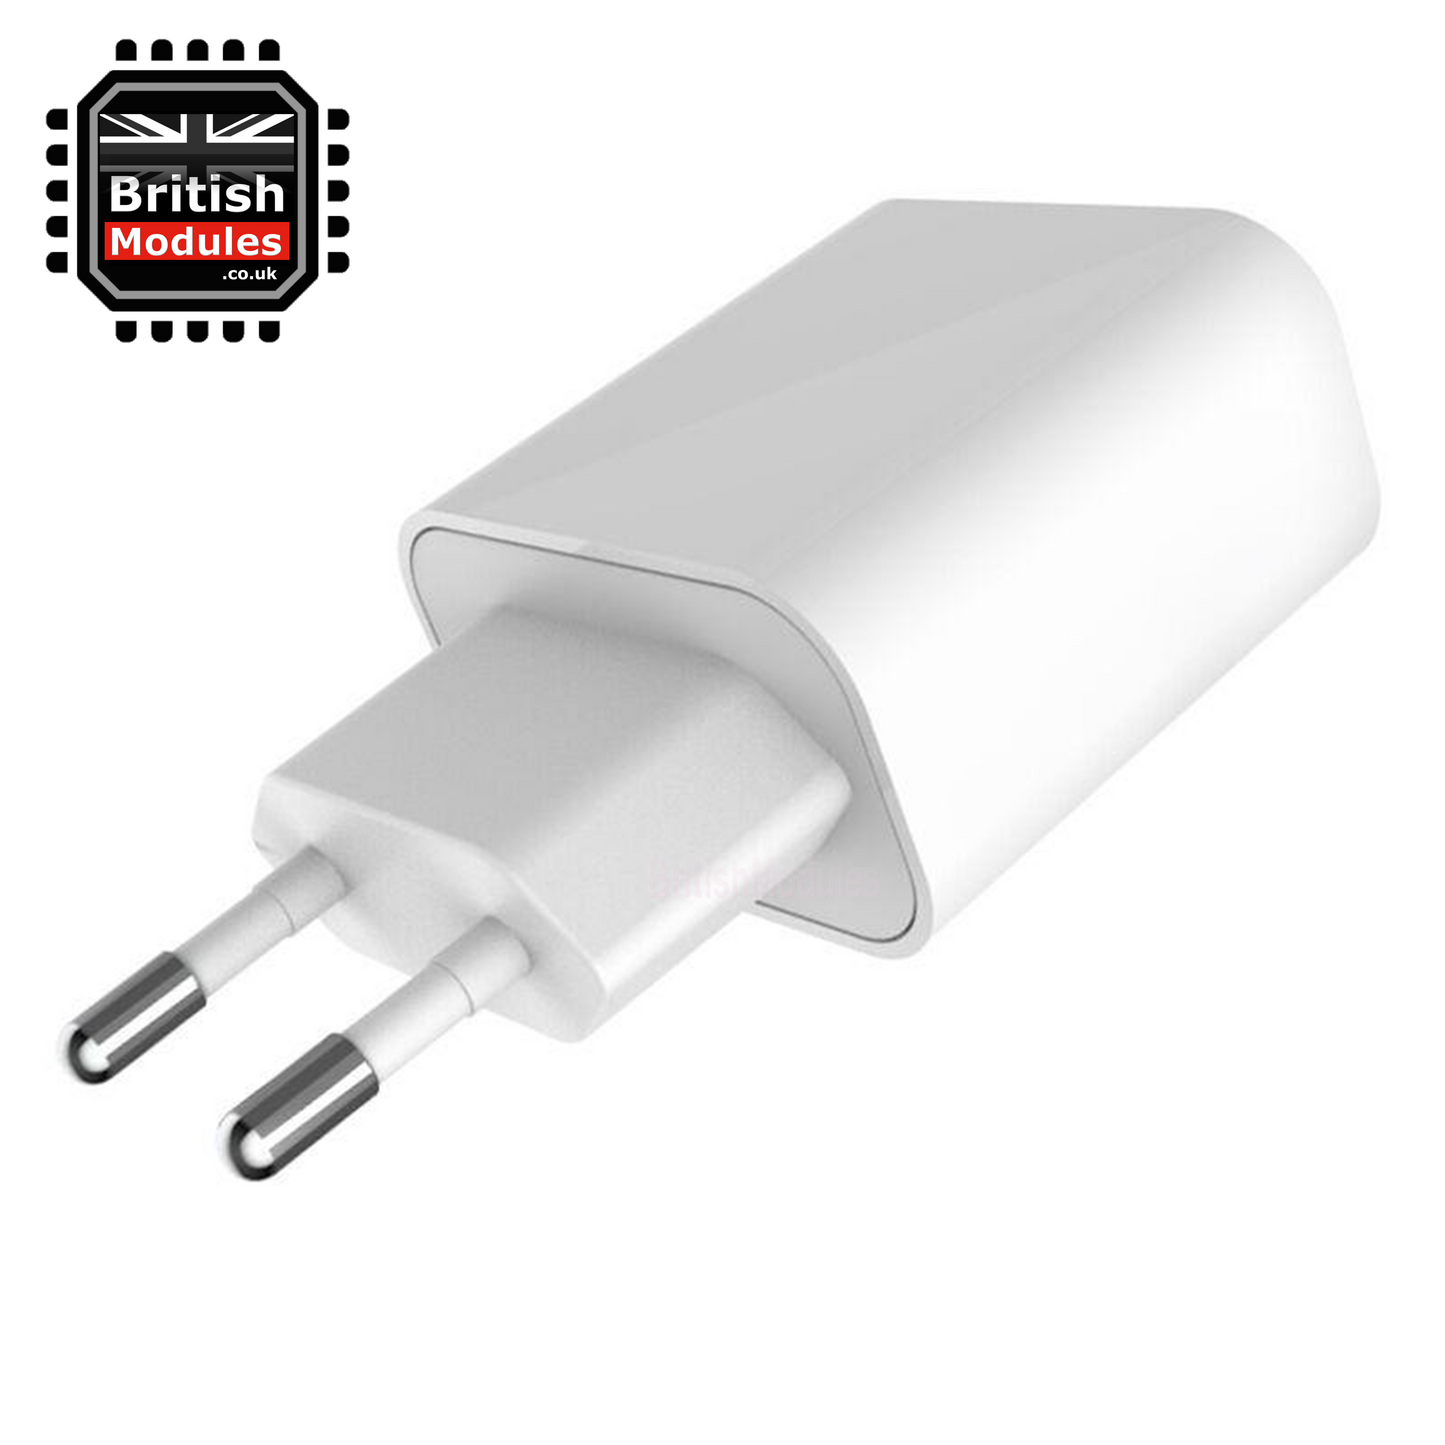 20W EU USB-C Power Adapter for iPhone Charger Head Plug PD